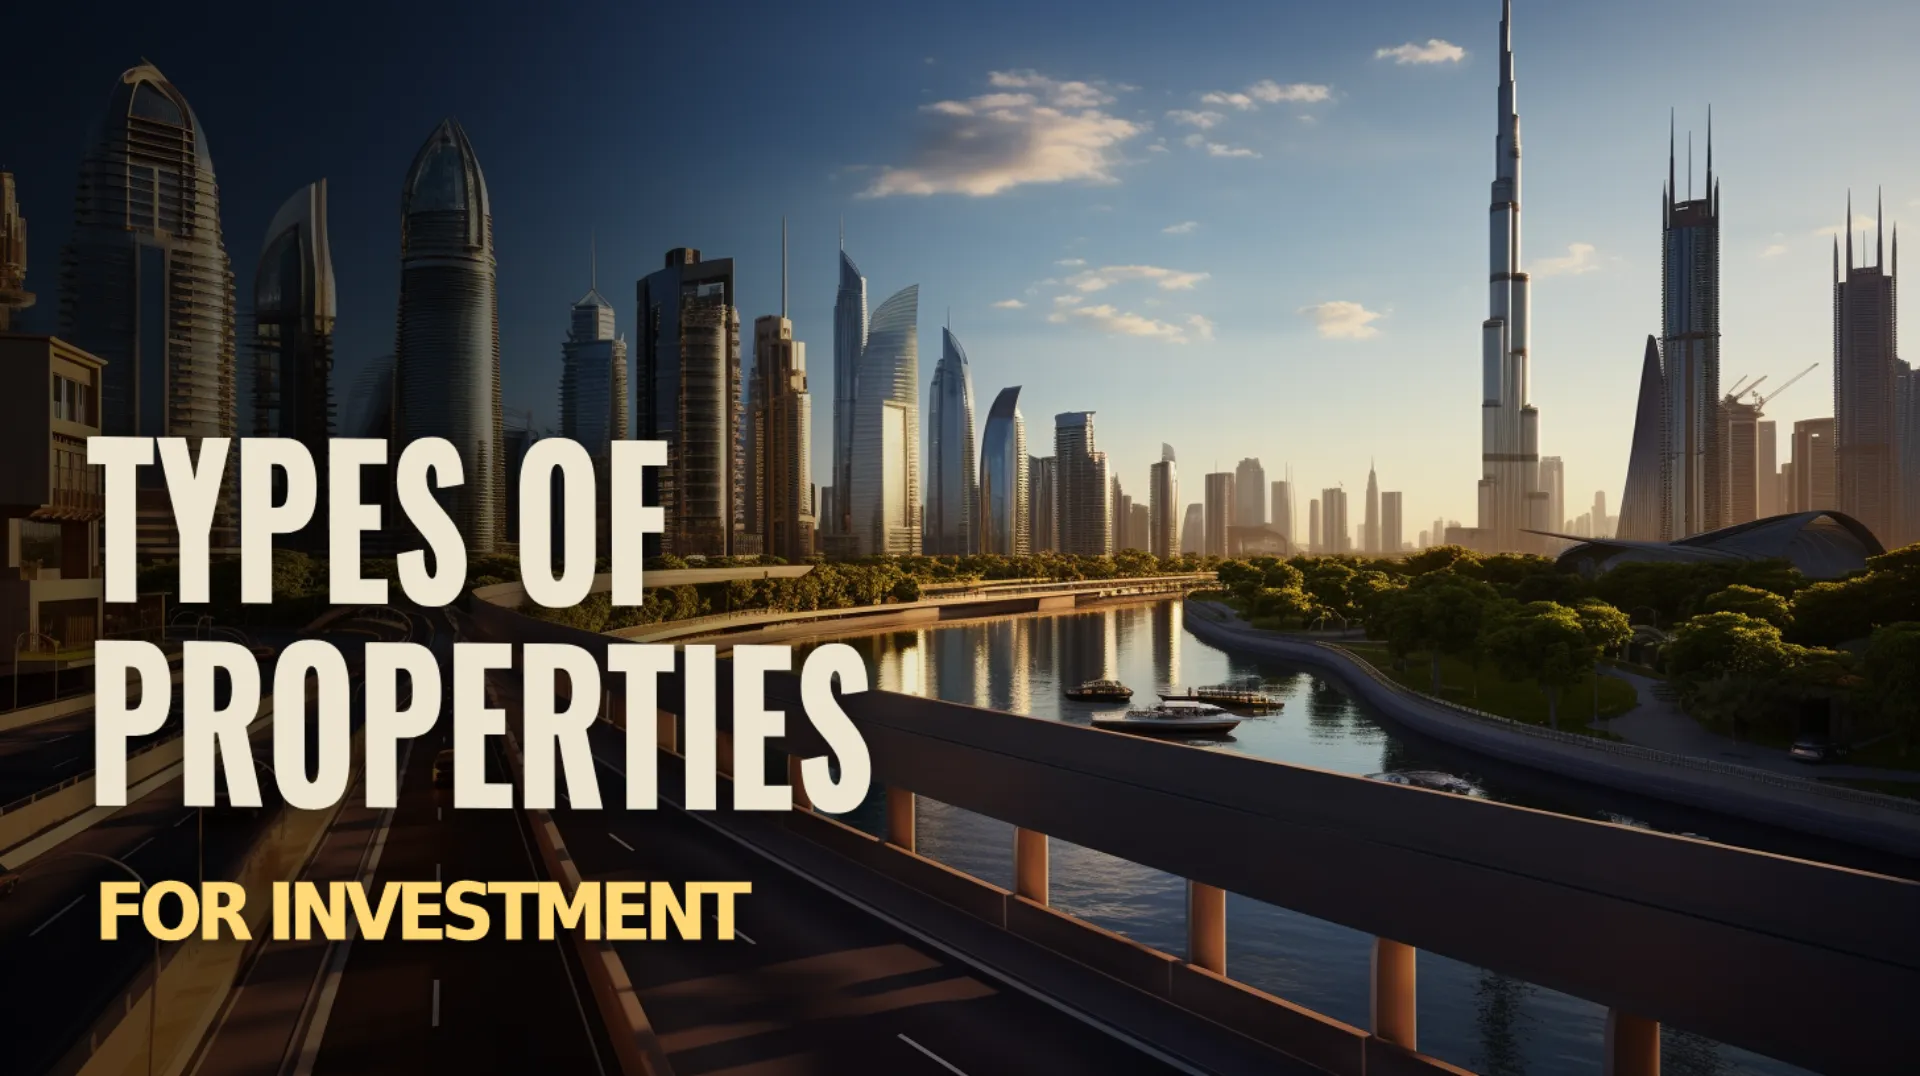 Types of Properties for Investment, Diverse Real Estate Options